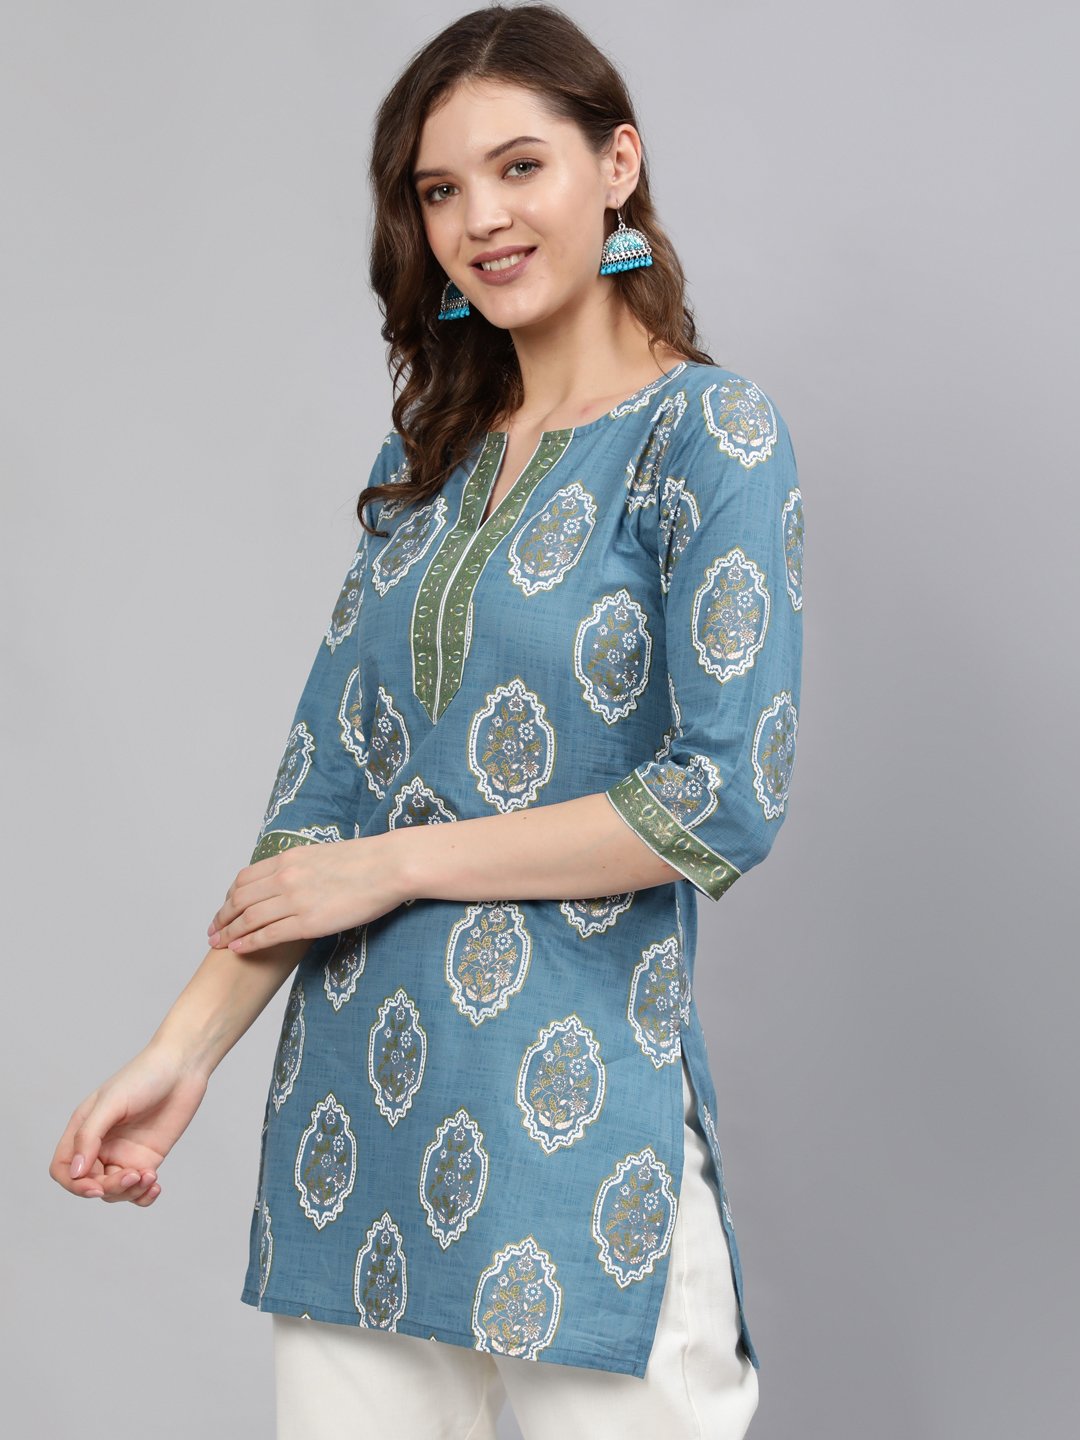 Women's Blue & Gold Printed Tunic With Three Quarter Sleeves - Nayo Clothing USA